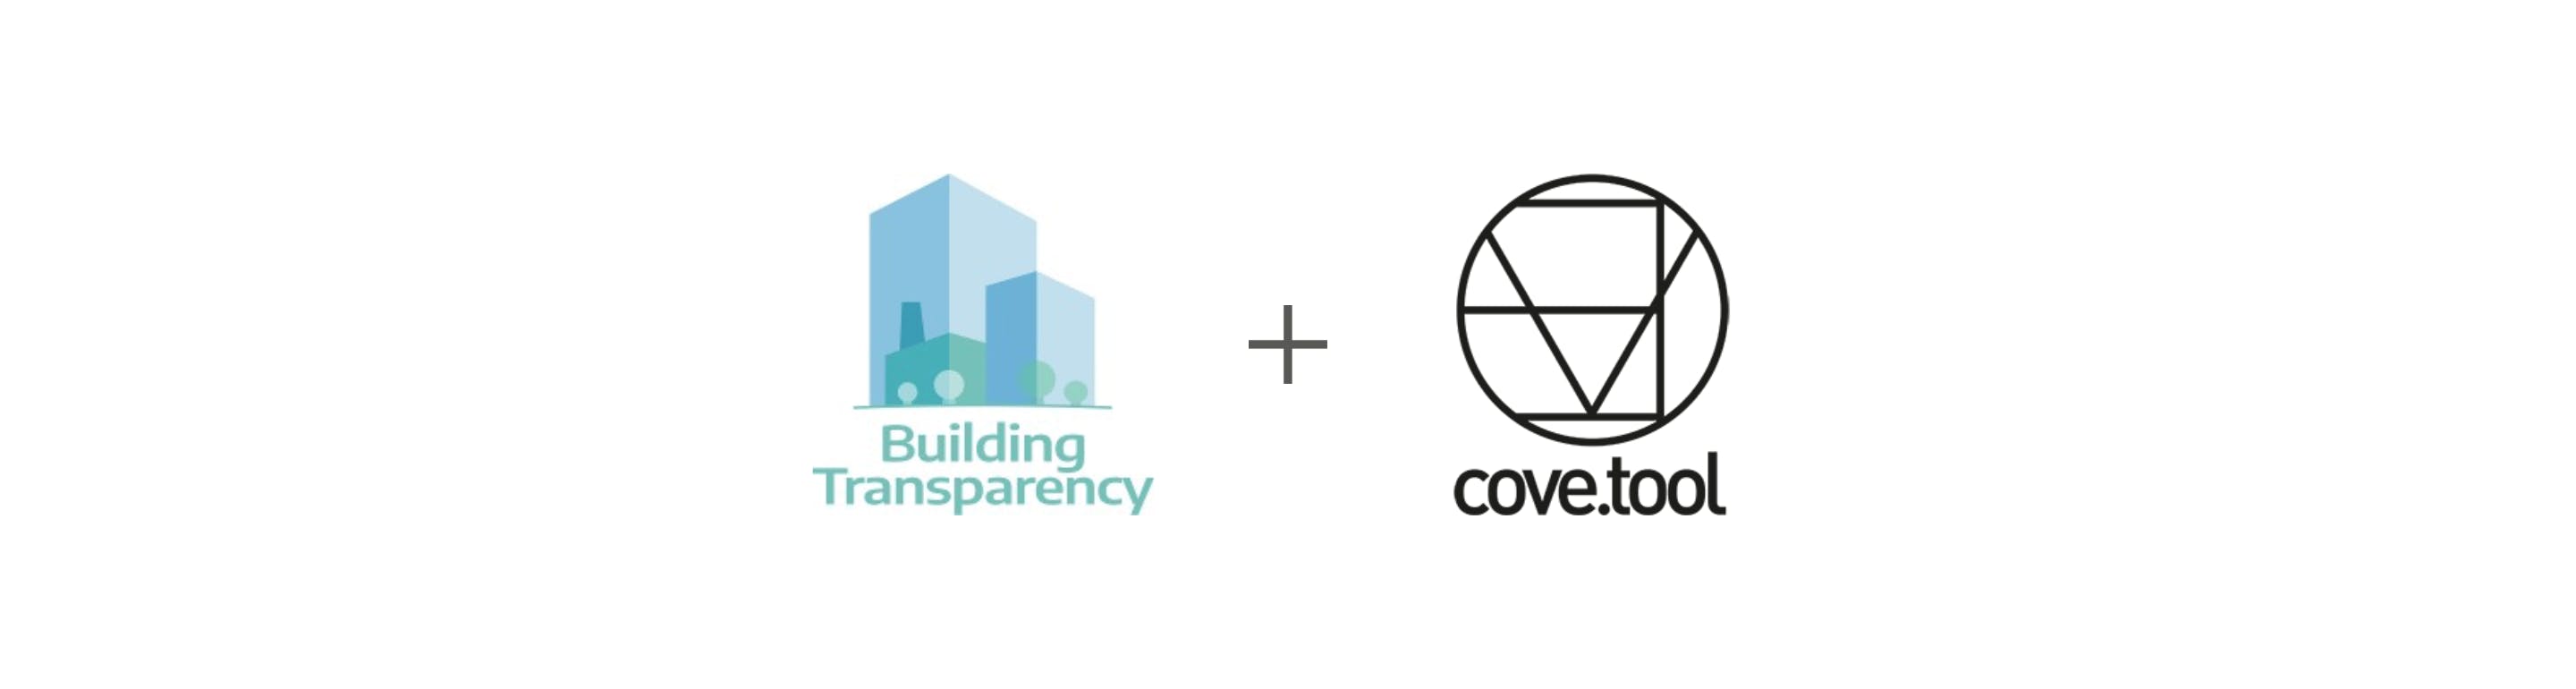 Building transparency logo and cove.tool logo